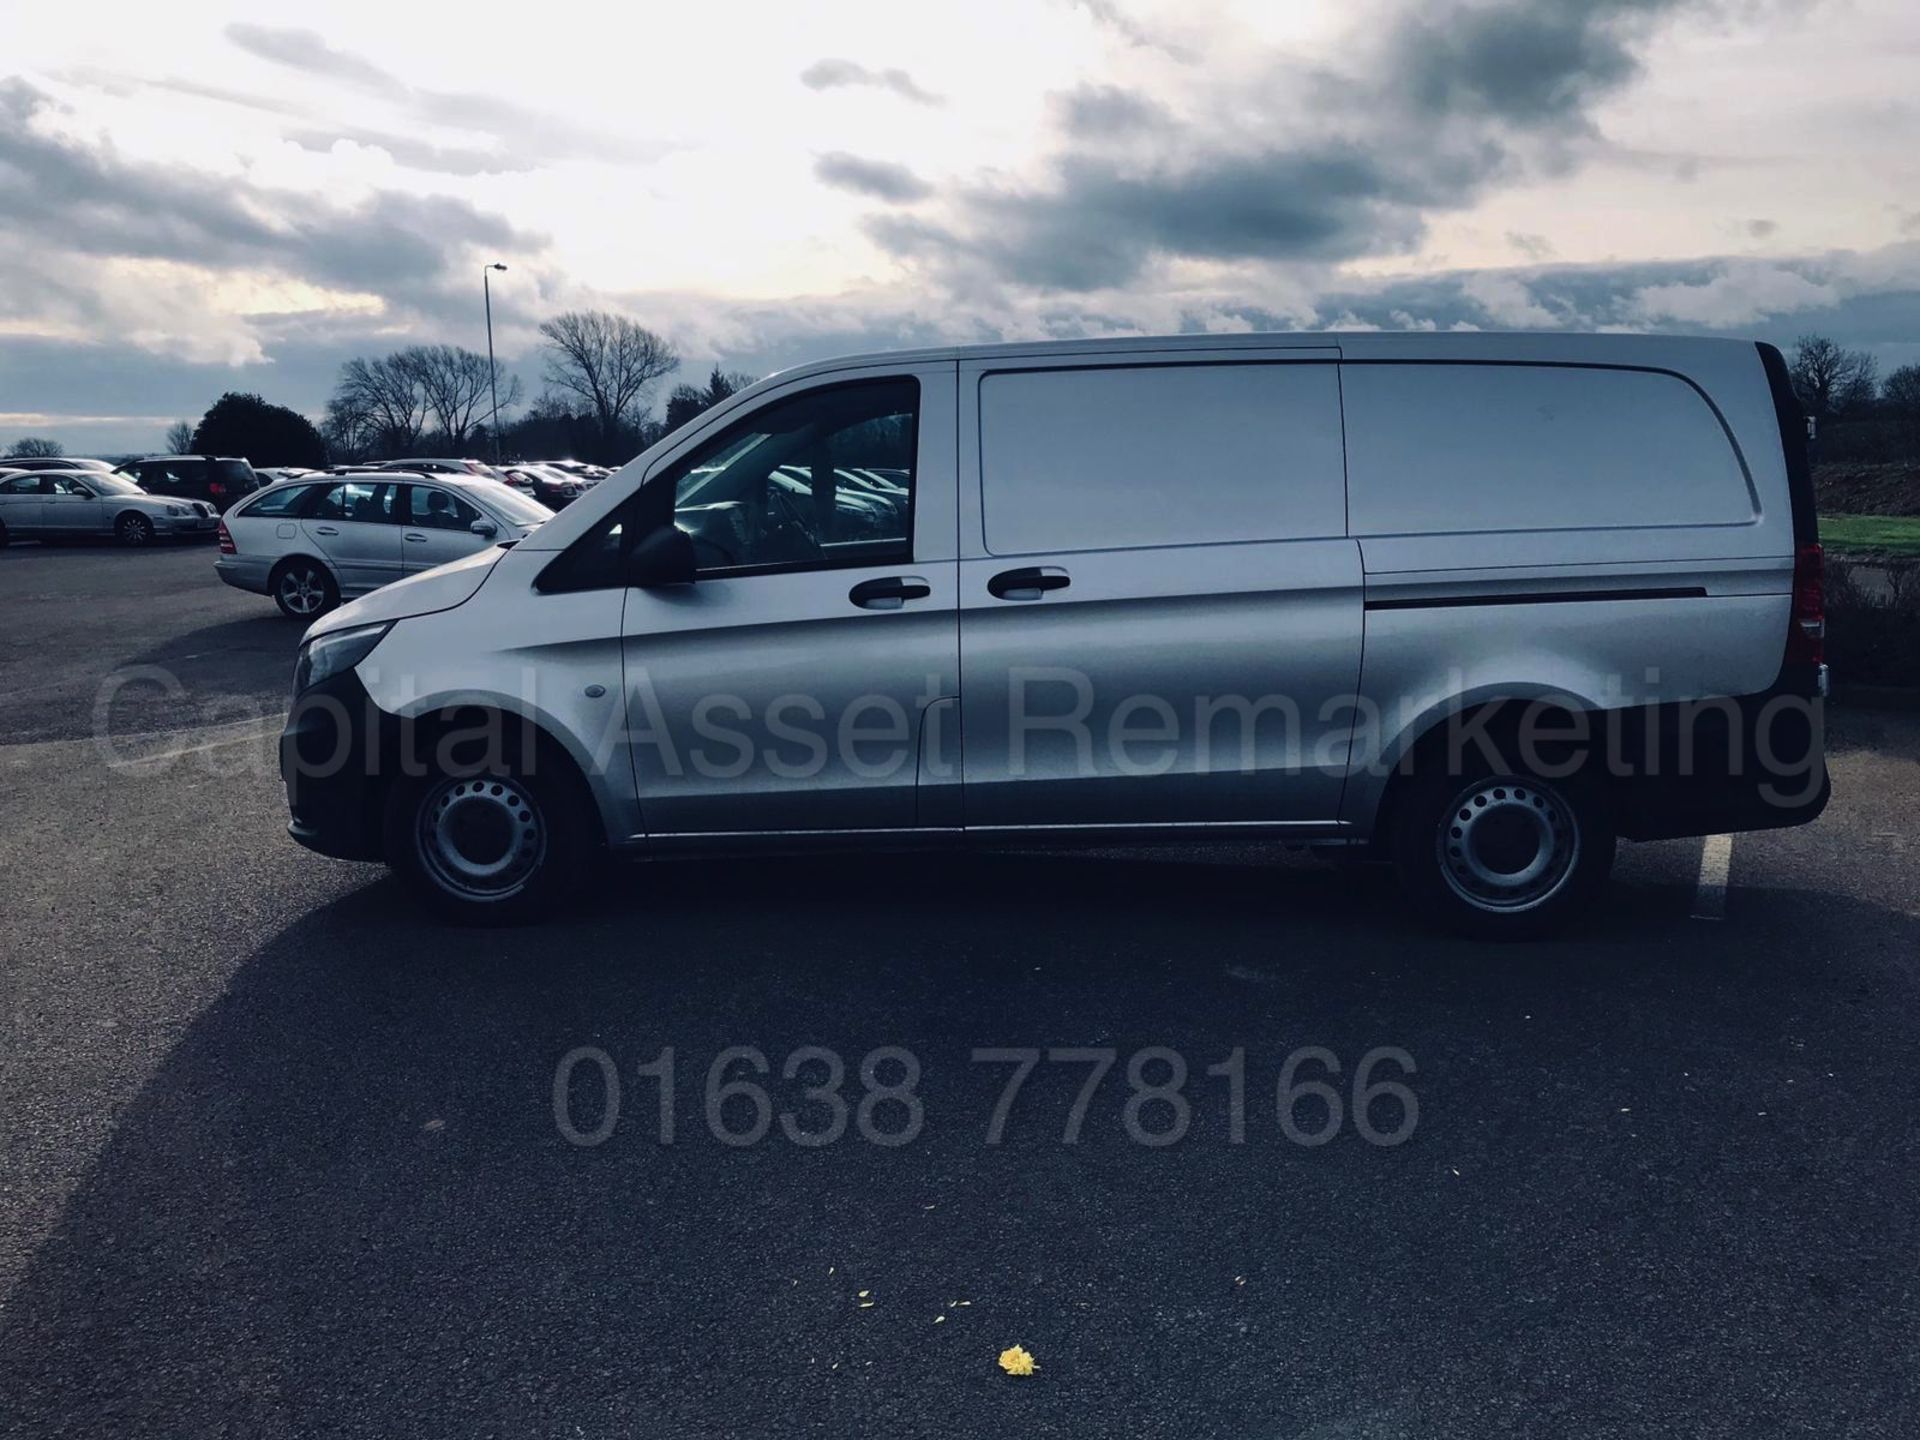 (ON SALE) MERCEDES VITO 116CDI BLUETEC (2016 MODEL) LWB - 1 OWNER - AIR CON - 163BHP - ELEC PACK - Image 5 of 17